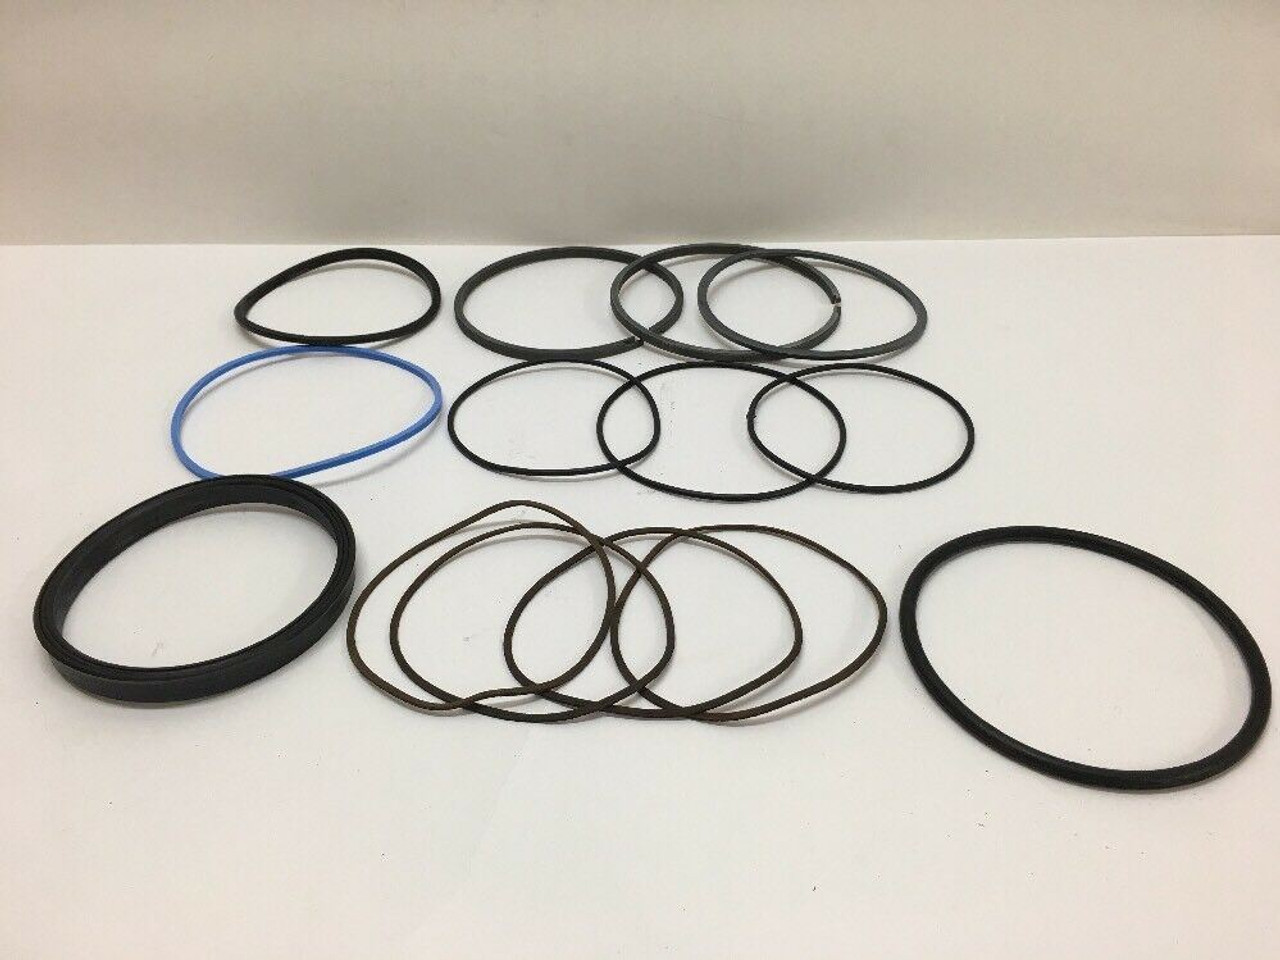 P&H Hydraulic Equipment Seal Kit - O-Rings, Rod Seal, Wear Rings, and more